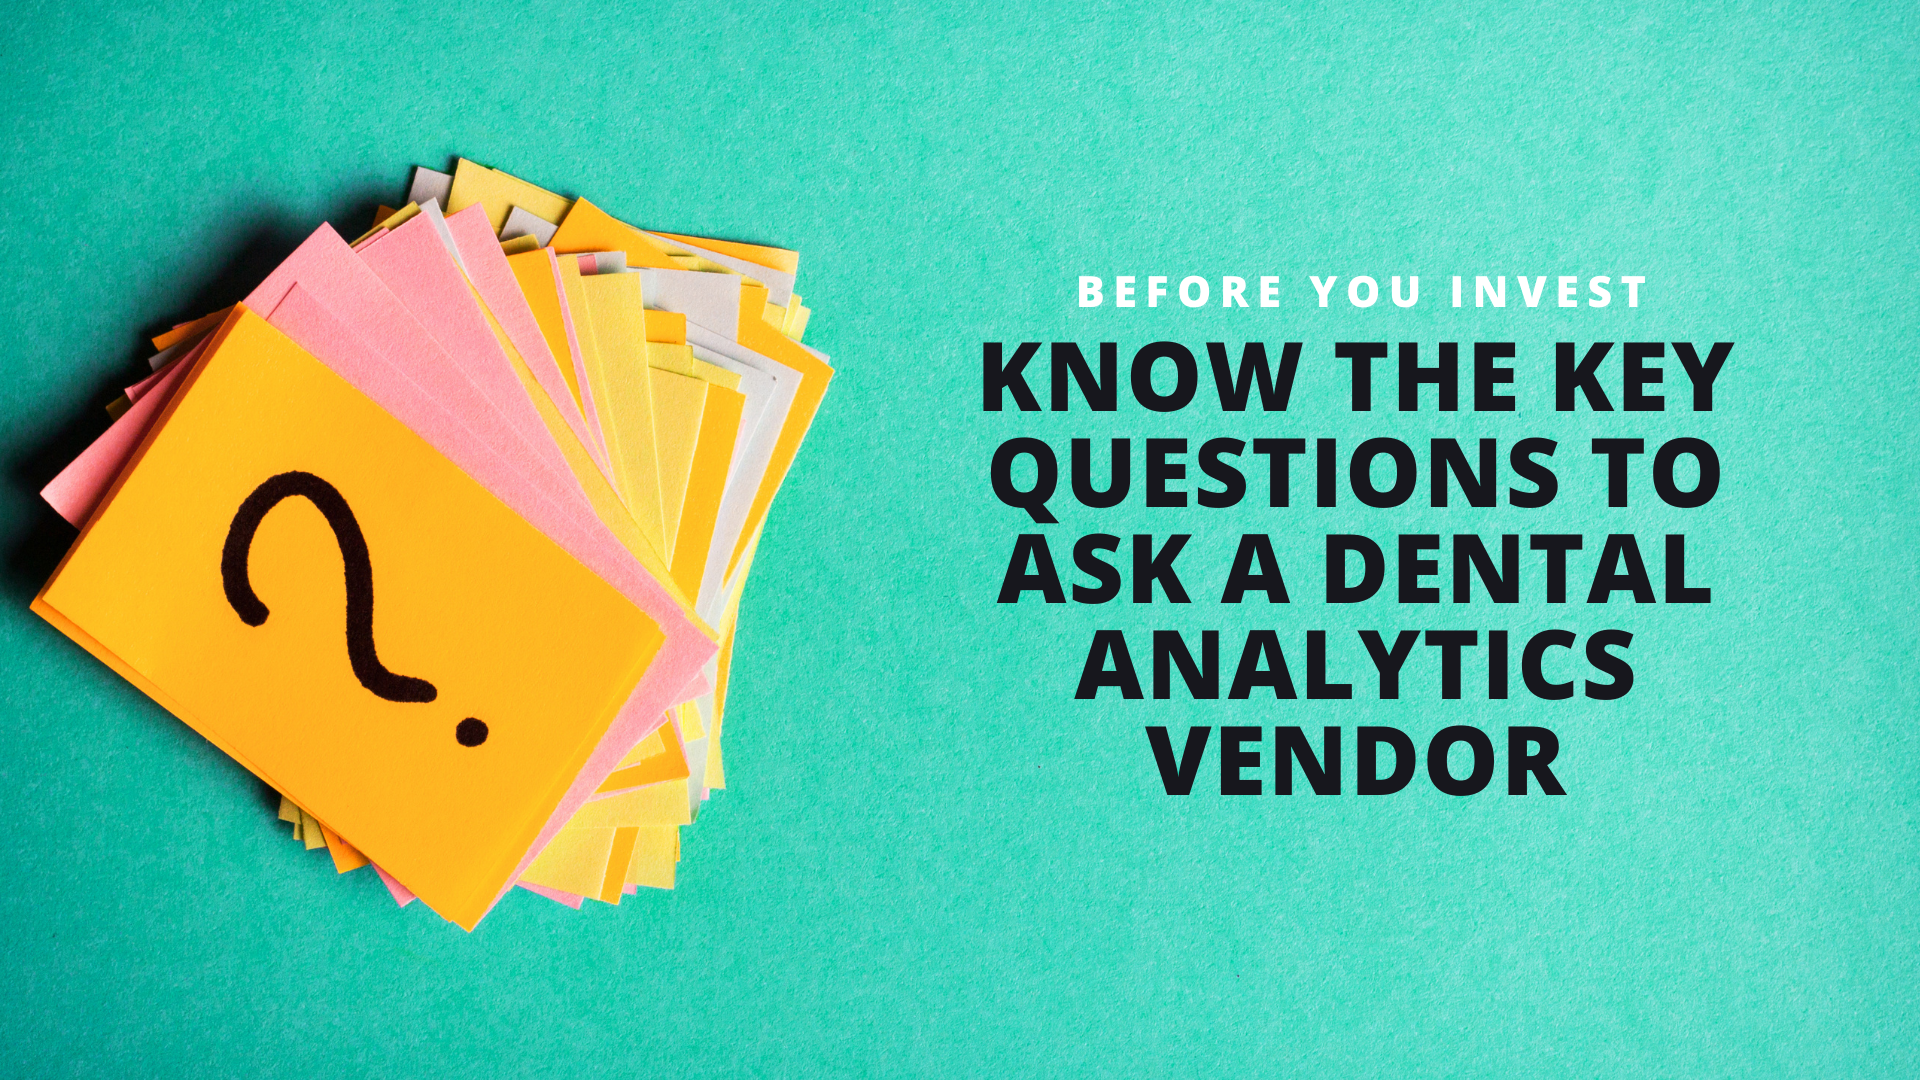 Before You Invest – Know the Key Questions to Ask a Dental Analytics Vendor